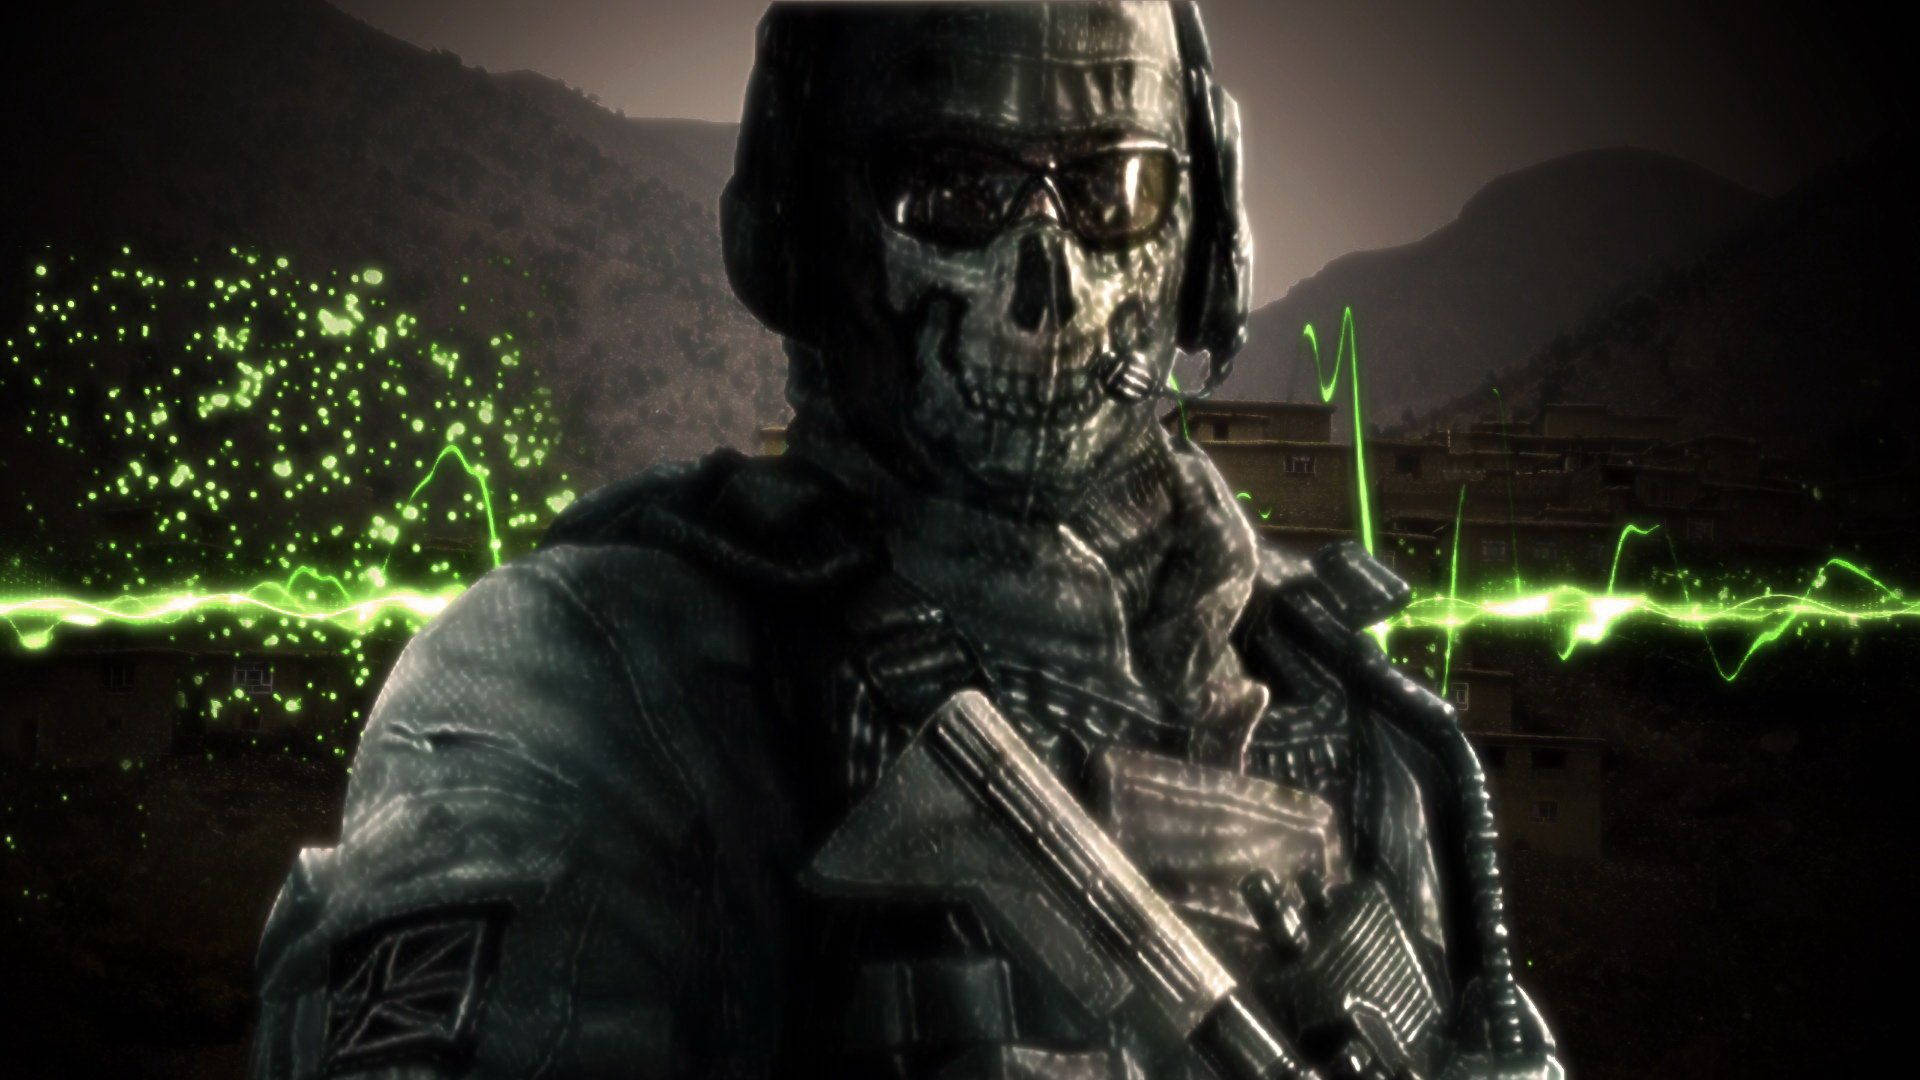 Free Call Of Duty Ghost Wallpaper Downloads, Call Of Duty Ghost Wallpaper for FREE